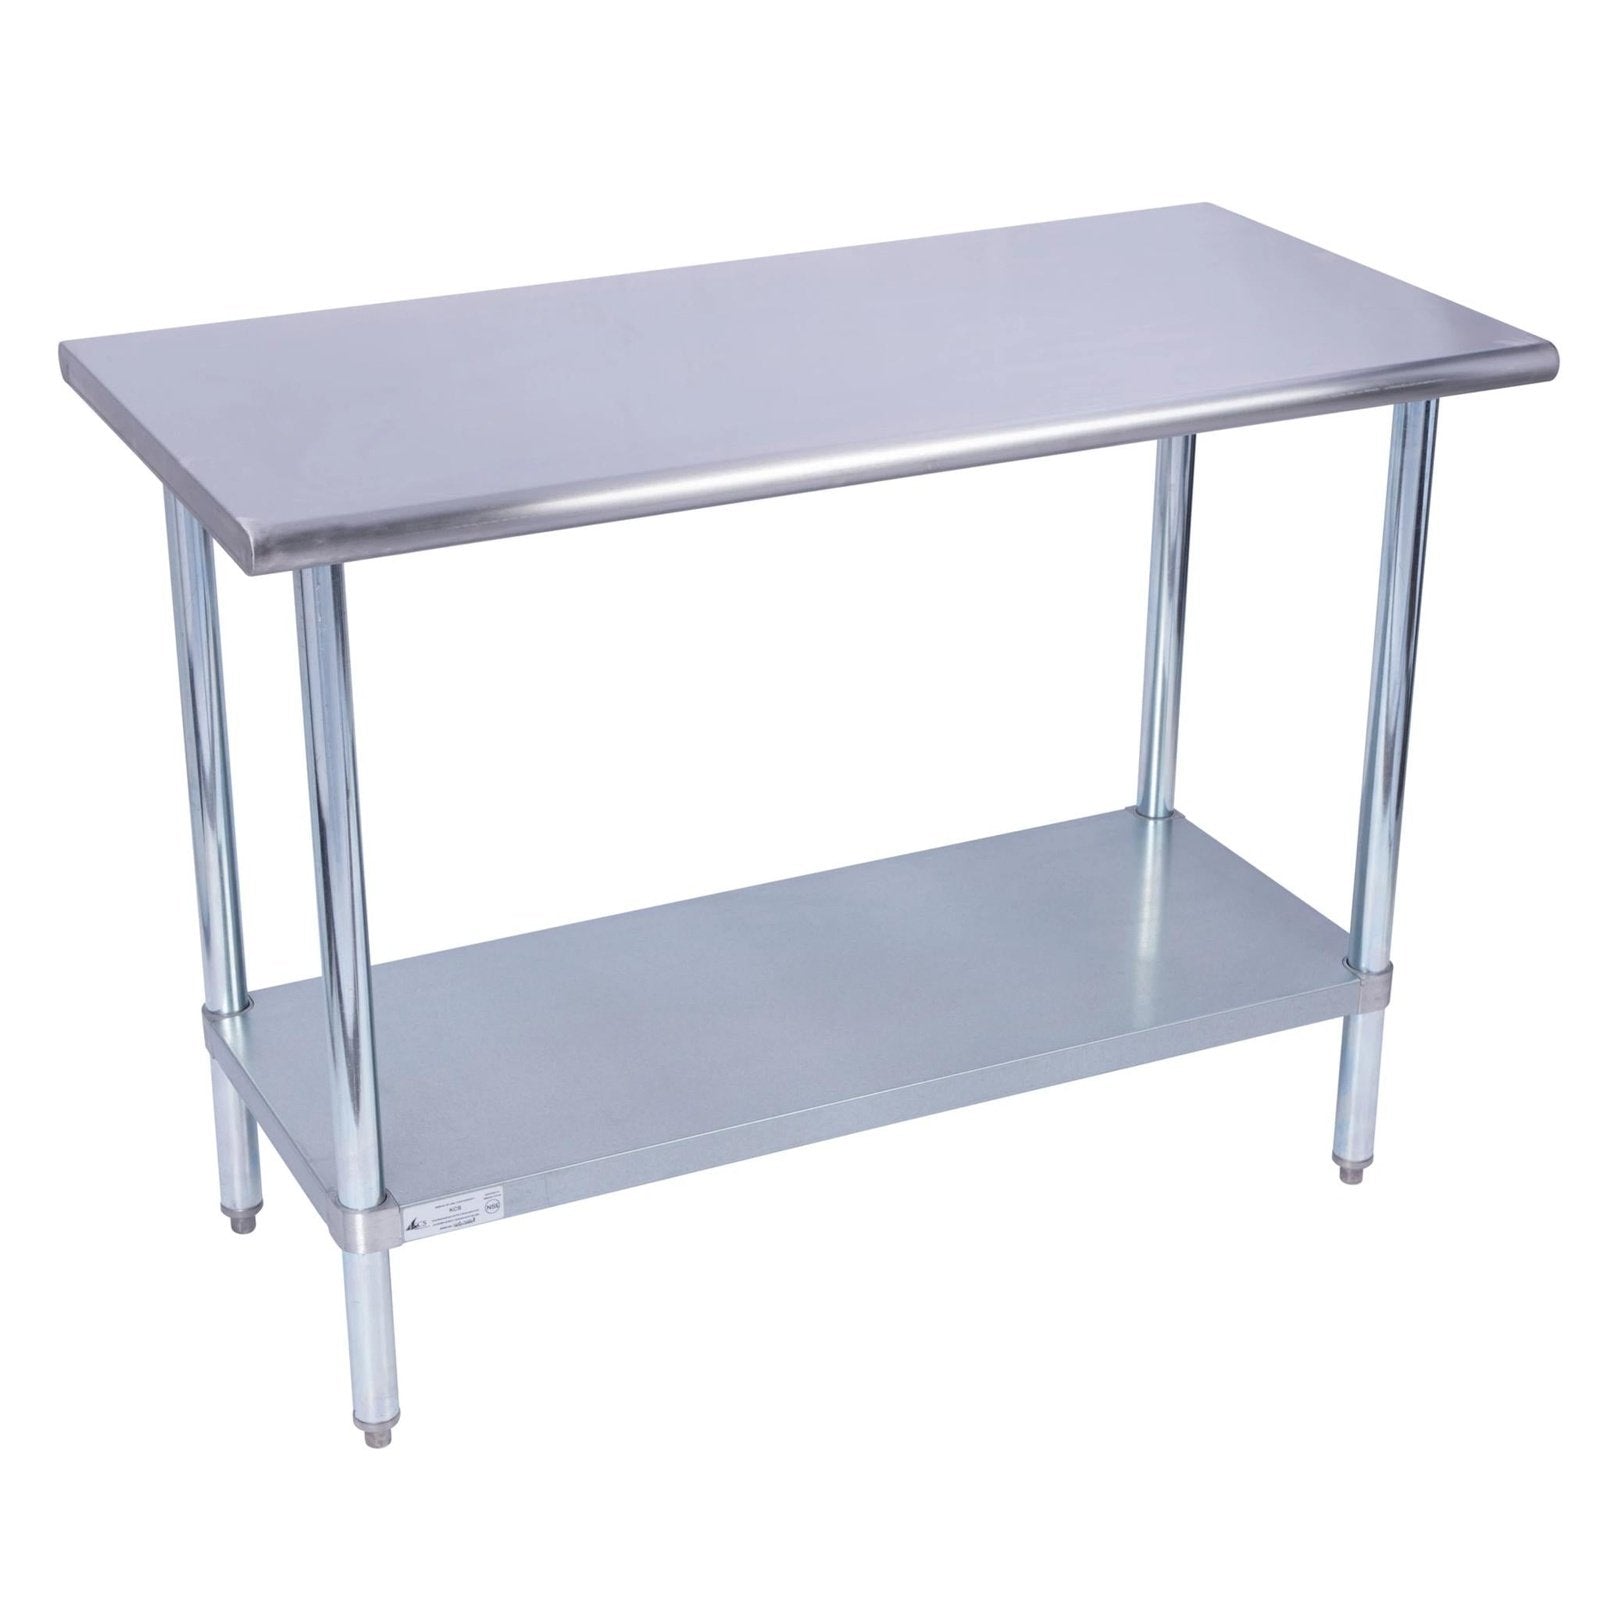 KCS 30" x 30" Stainless Steel Work Table with Galvanized Under Shelf